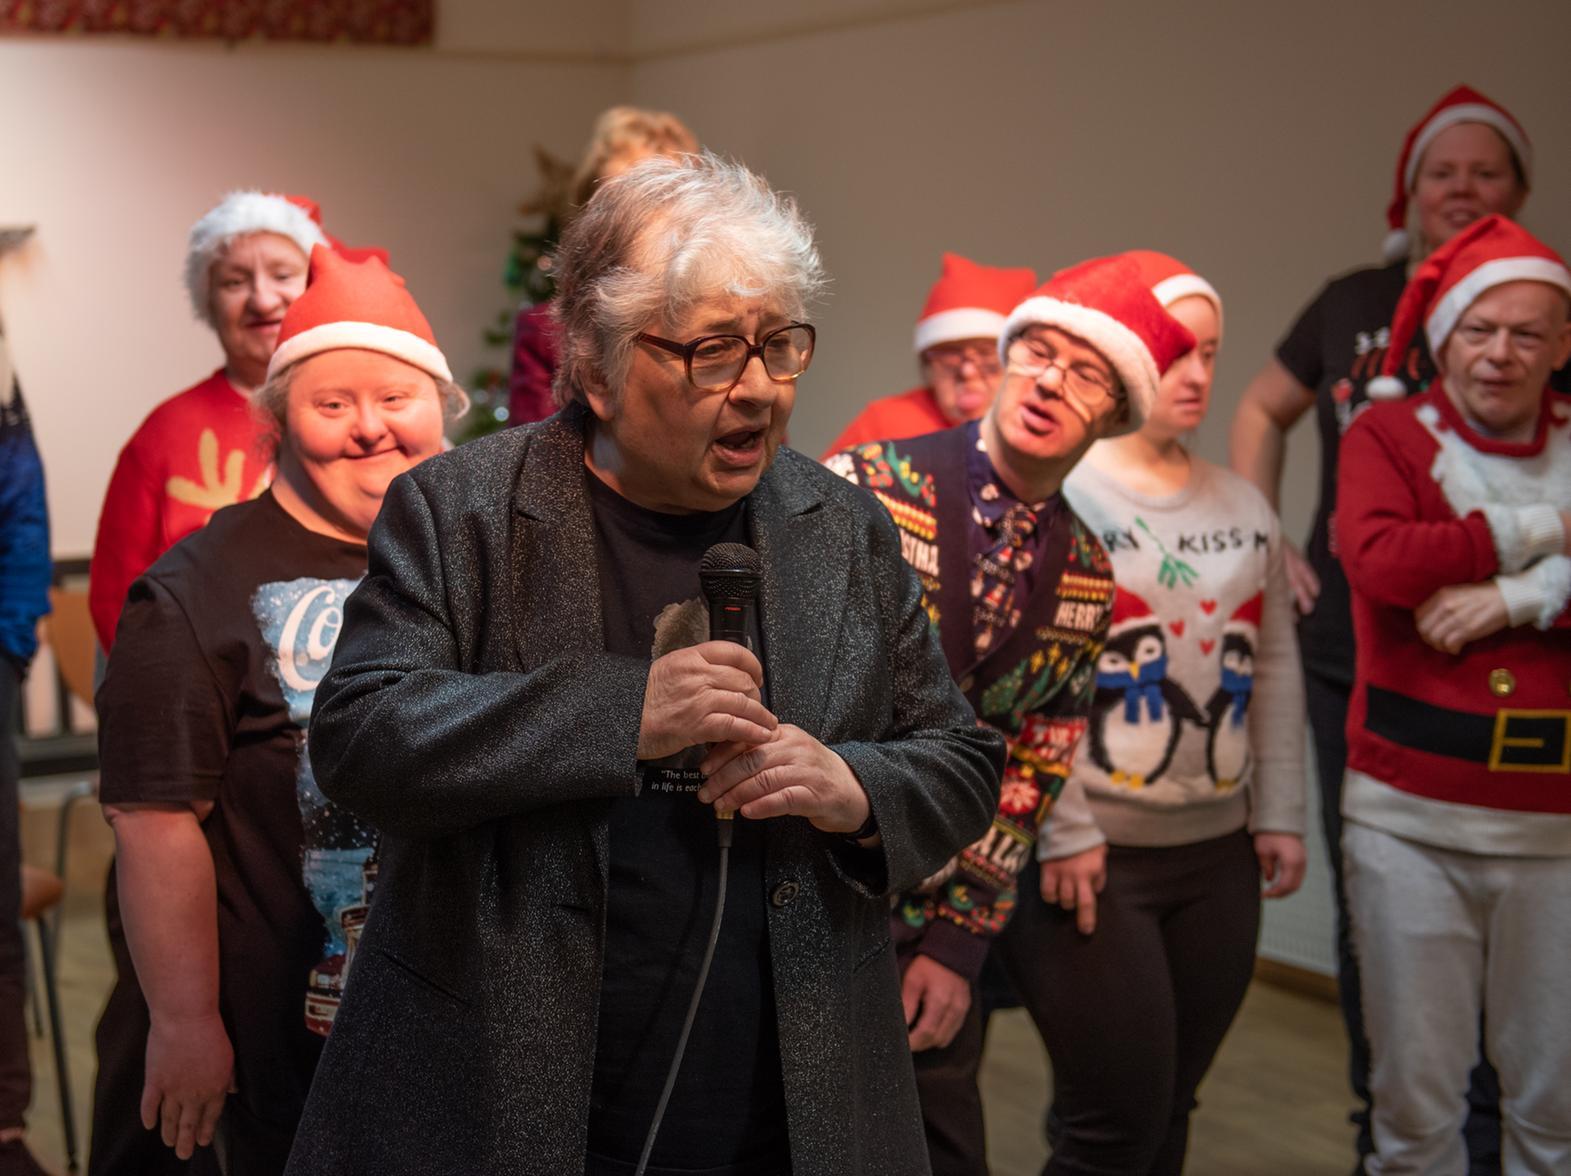 The Caring and Sharing Trust held their annual Christmas sing-a-long party at Cotton's Farmhouse in Cogenhoe today.